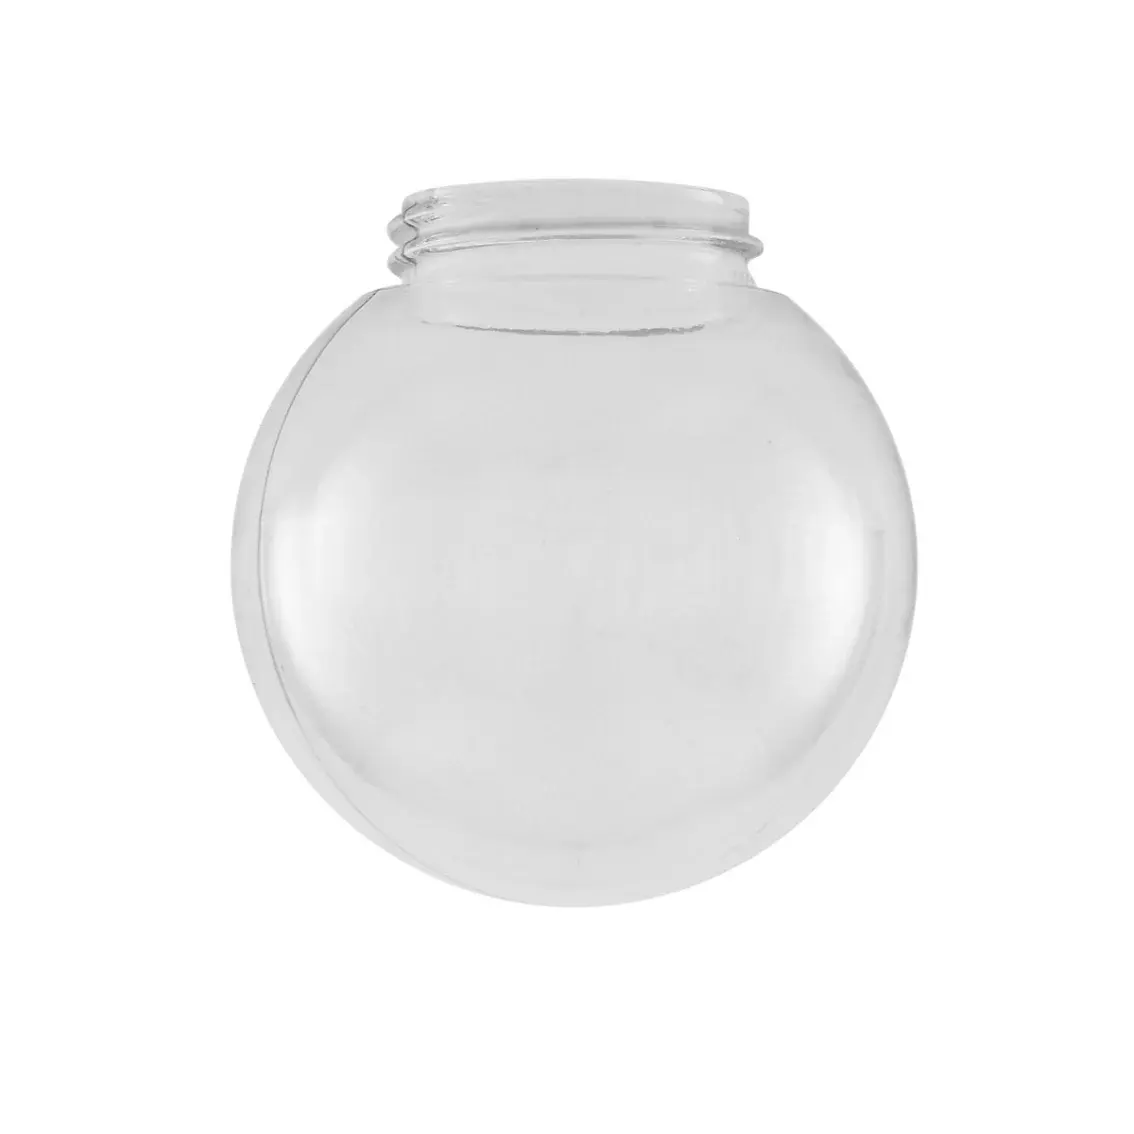 Mouth Blown Replacement Clear Opal White Threaded Globe Glass Ball Light Shade Lamp Cover for Light Fitting